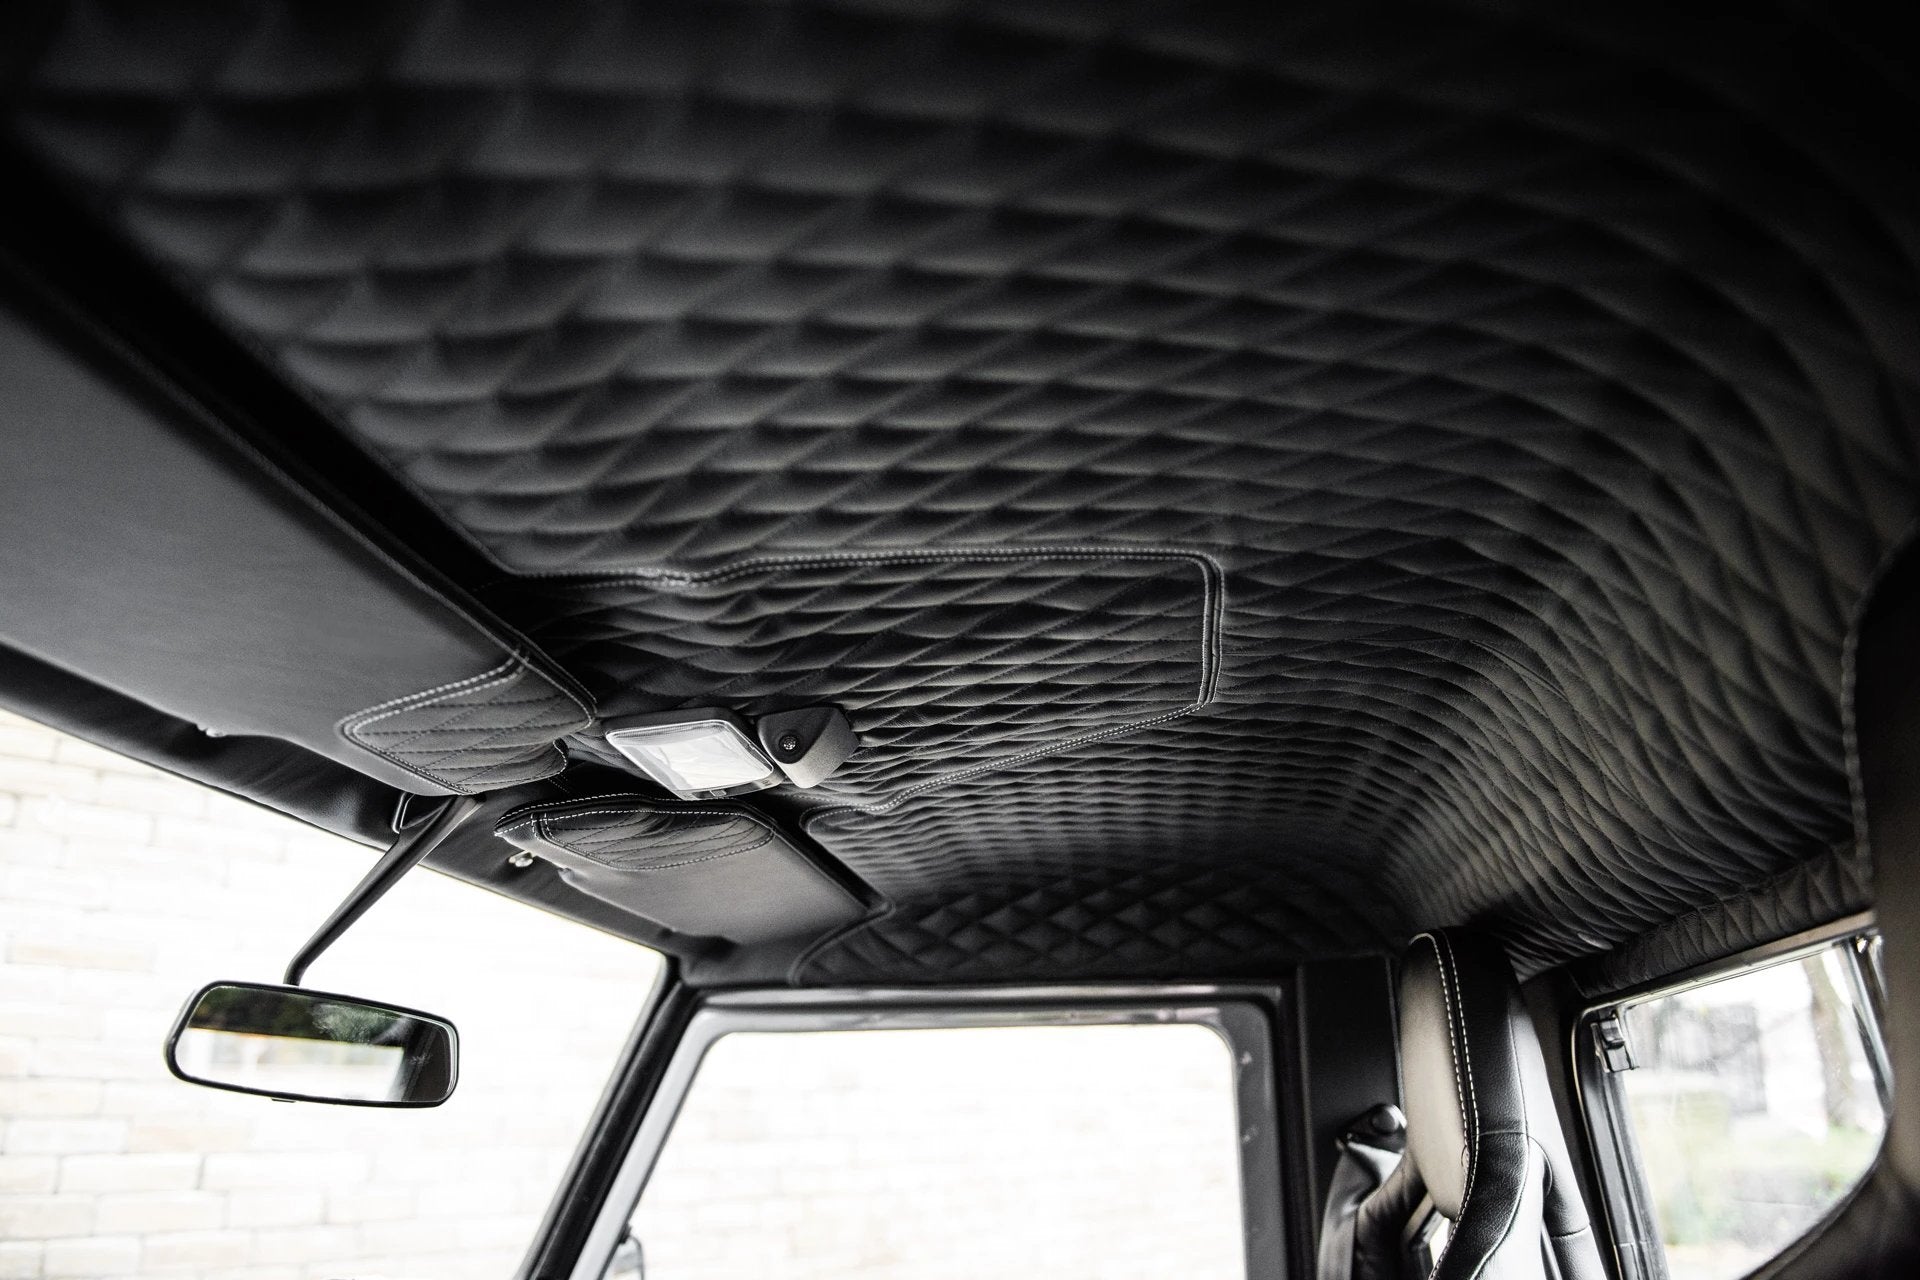 Land Rover Defender 90 Pickup (1991-2016) Roof Lining by Chelsea Truck Company - Image 1125